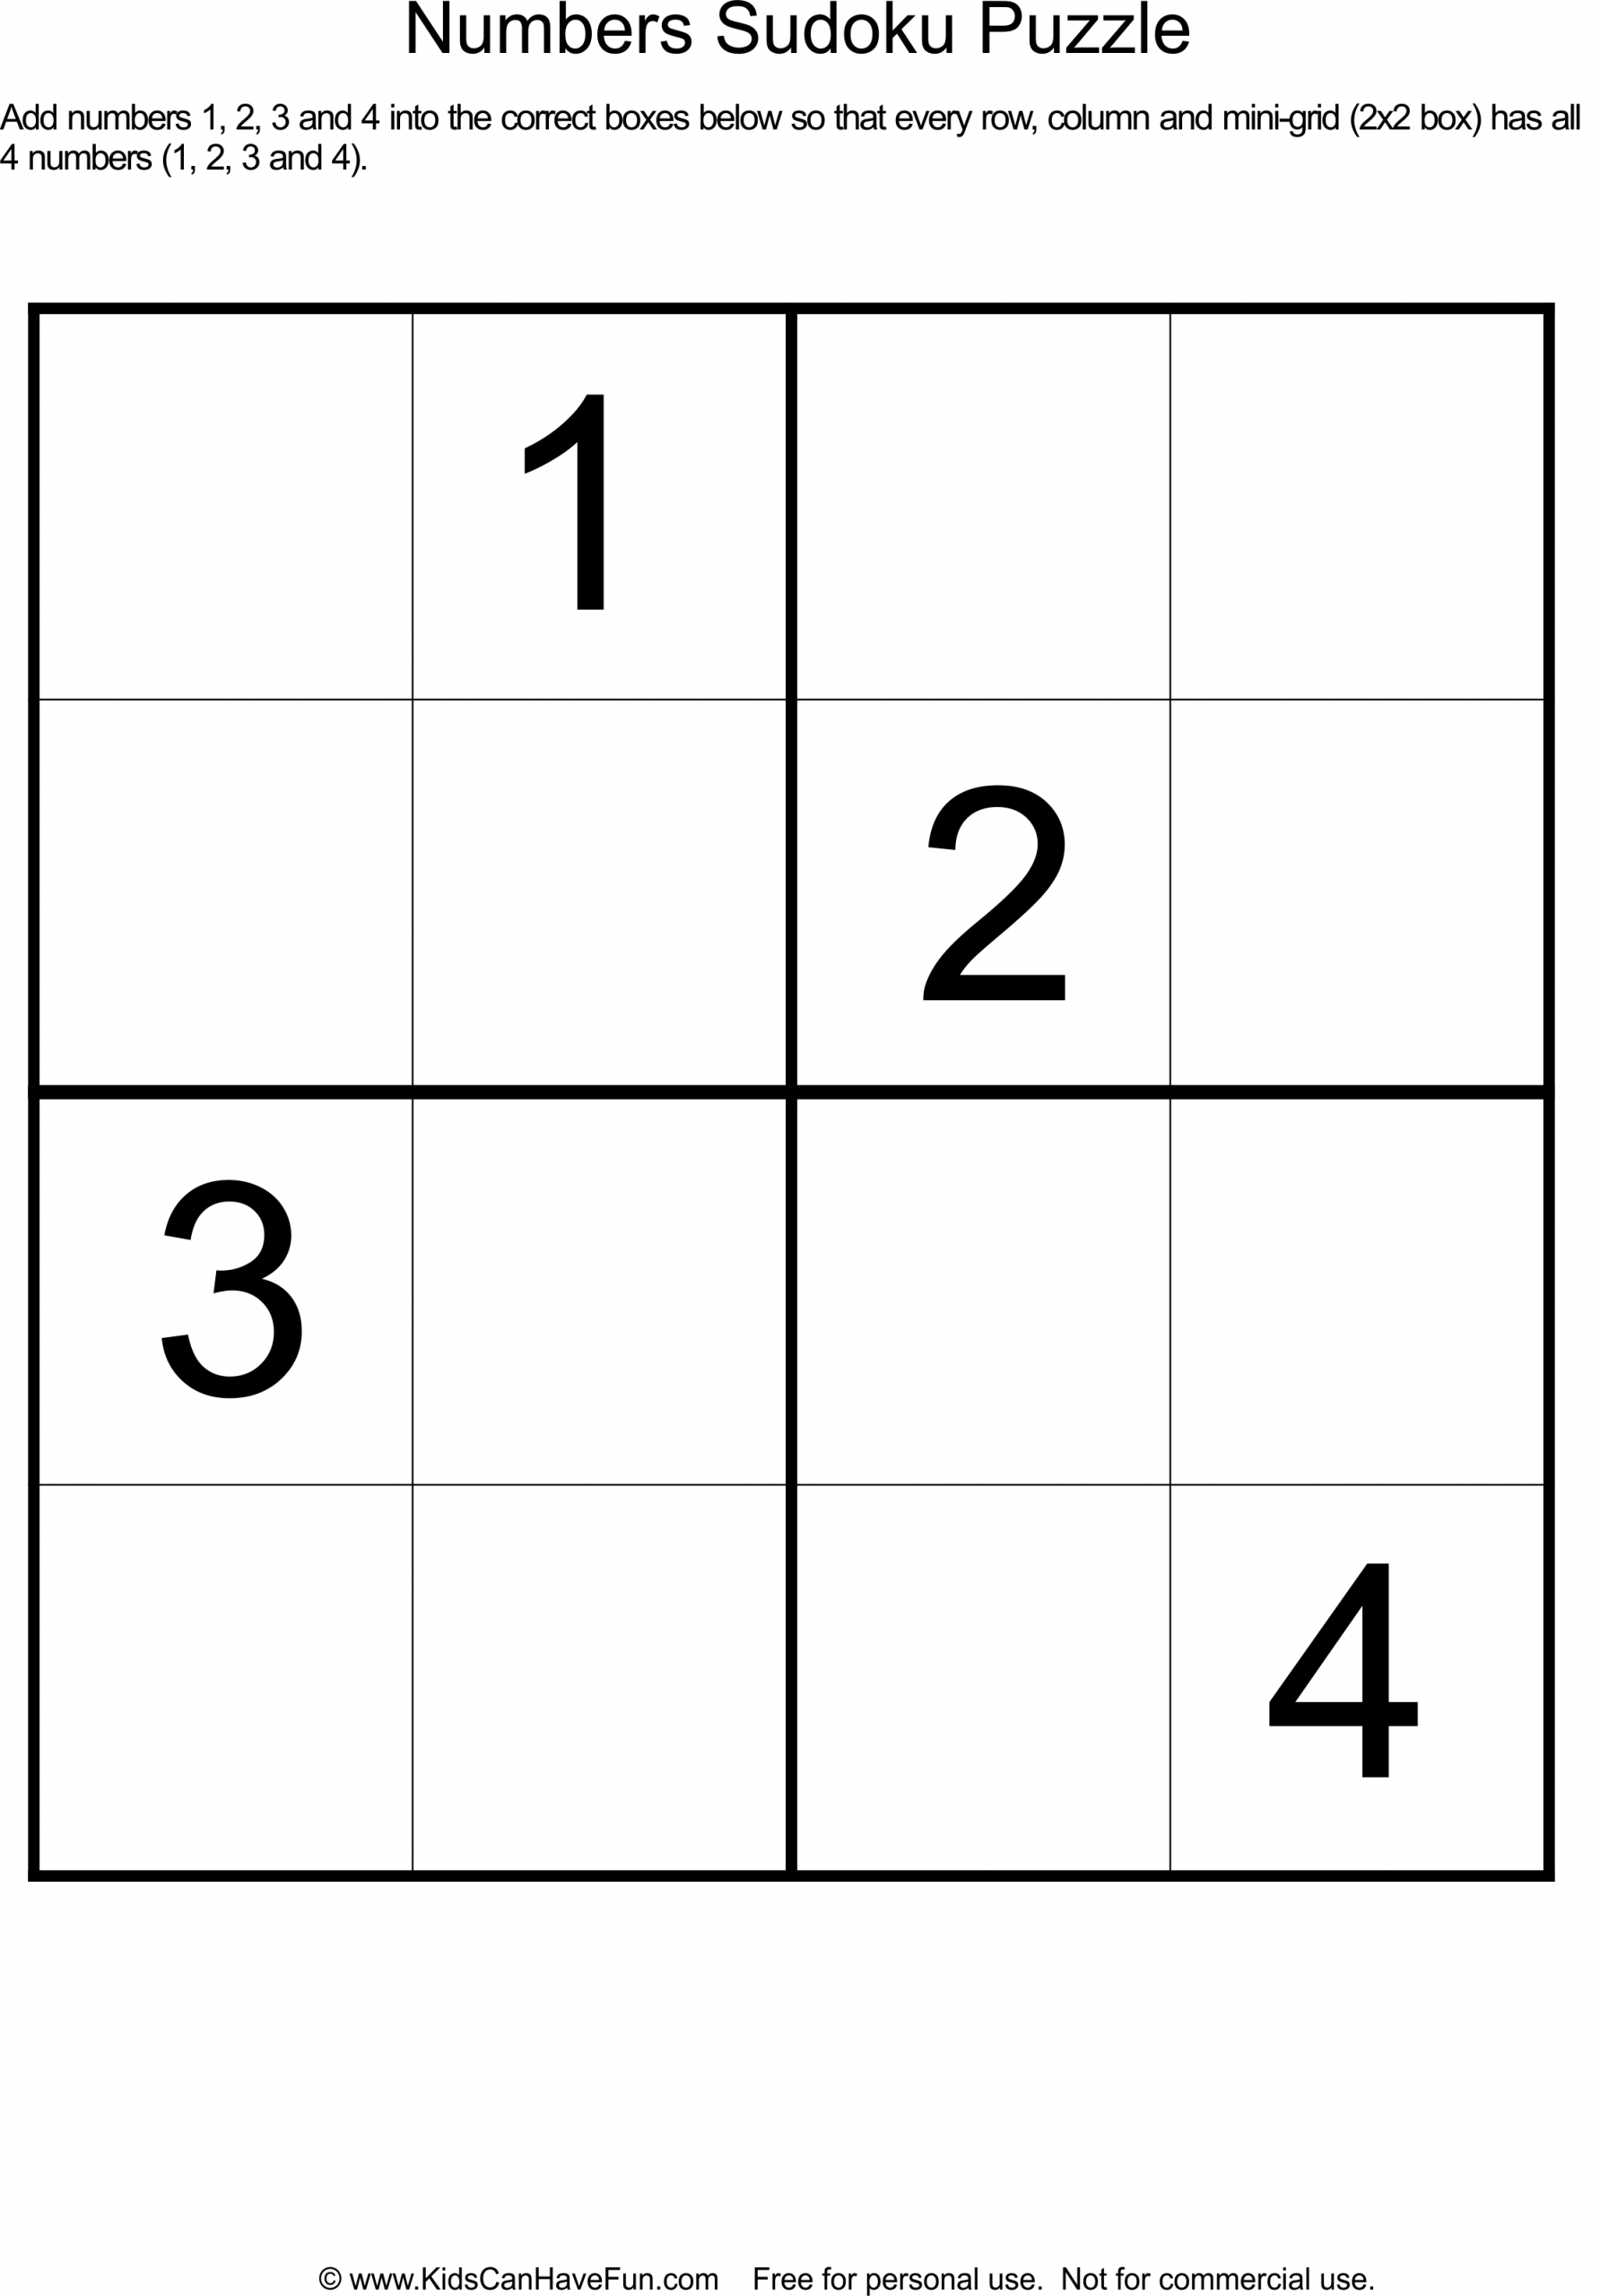 Sudoku Numbers Puzzle For Kids Http://www.kidscanhavefun